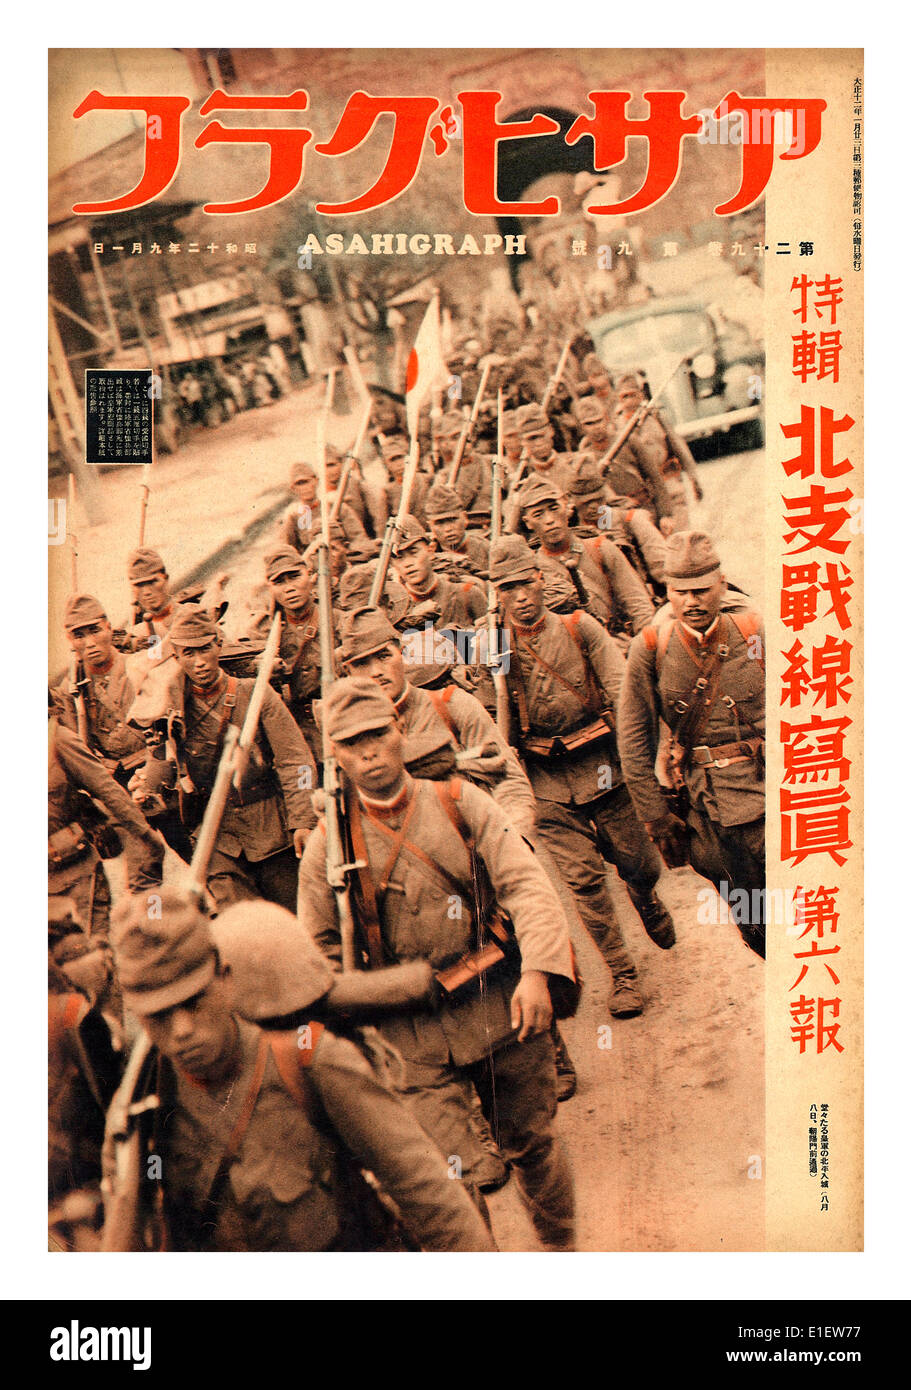 Vintage 1940's AsahiGraph Japanese magazine featuring WW2 notorious  Japanese army military troops marching illustration on front cover World War II Stock Photo